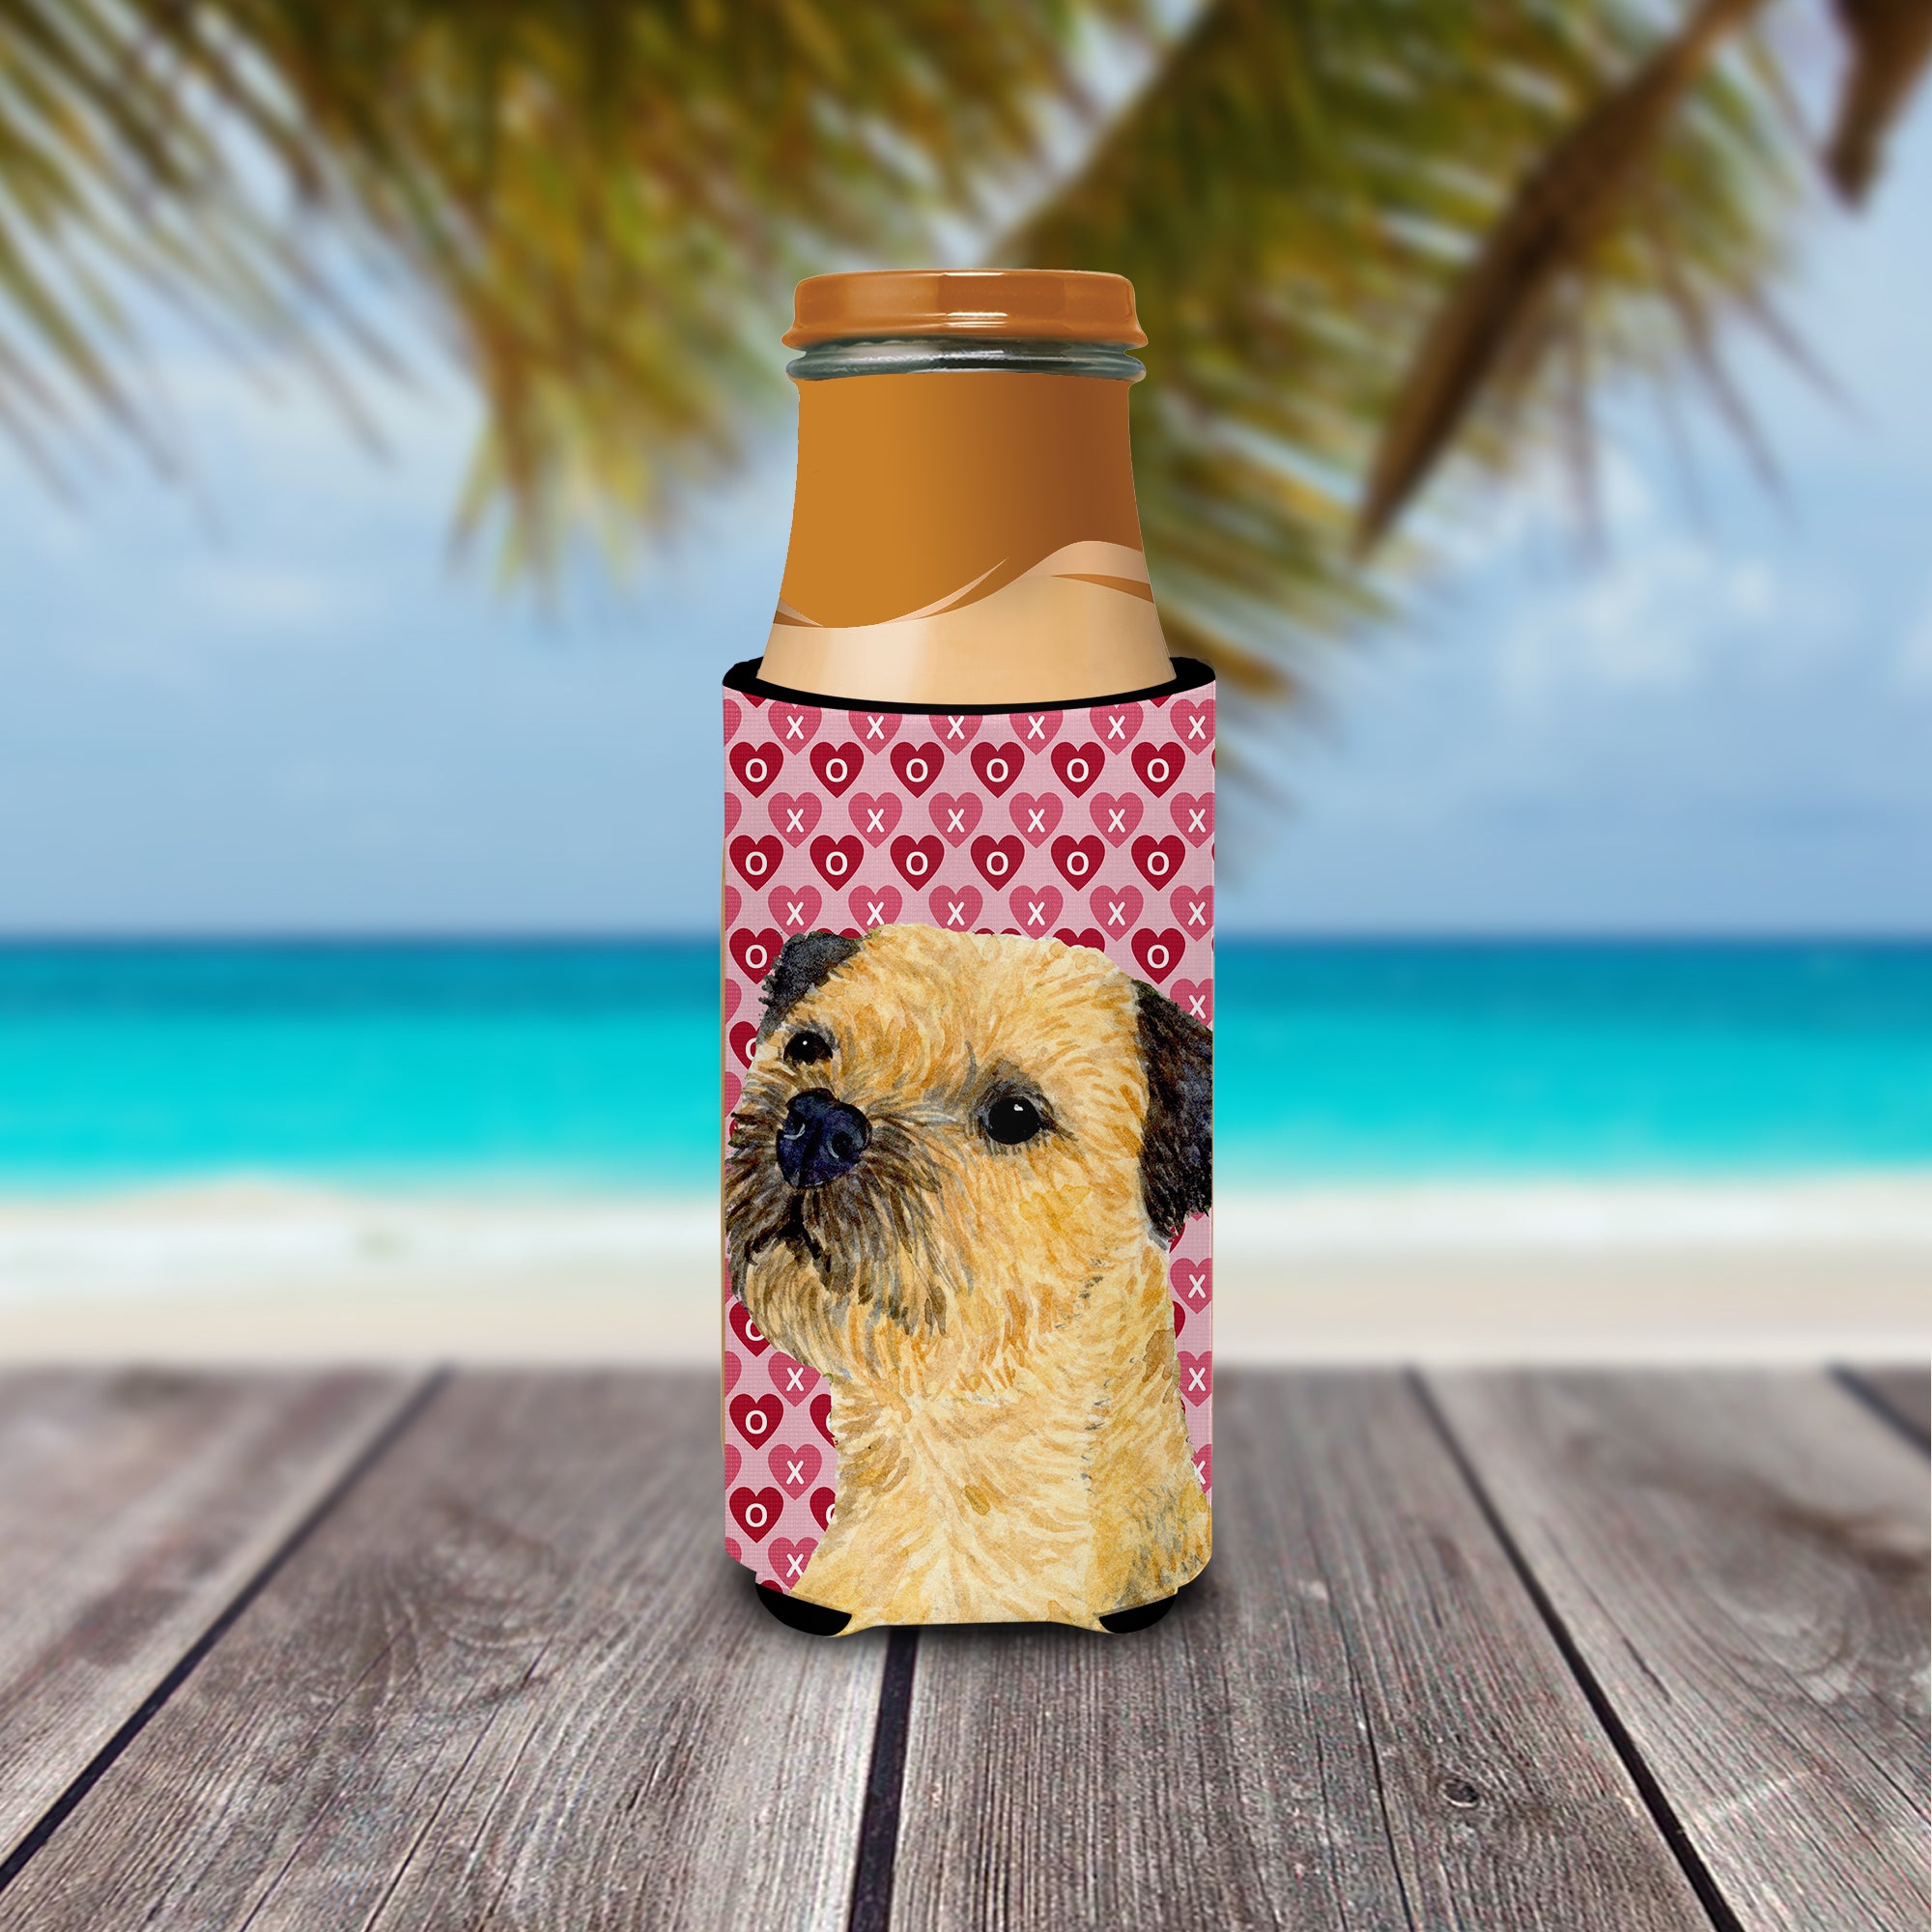 Border Terrier Hearts Love and Valentine's Day Portrait Ultra Beverage Insulators for slim cans LH9143MUK